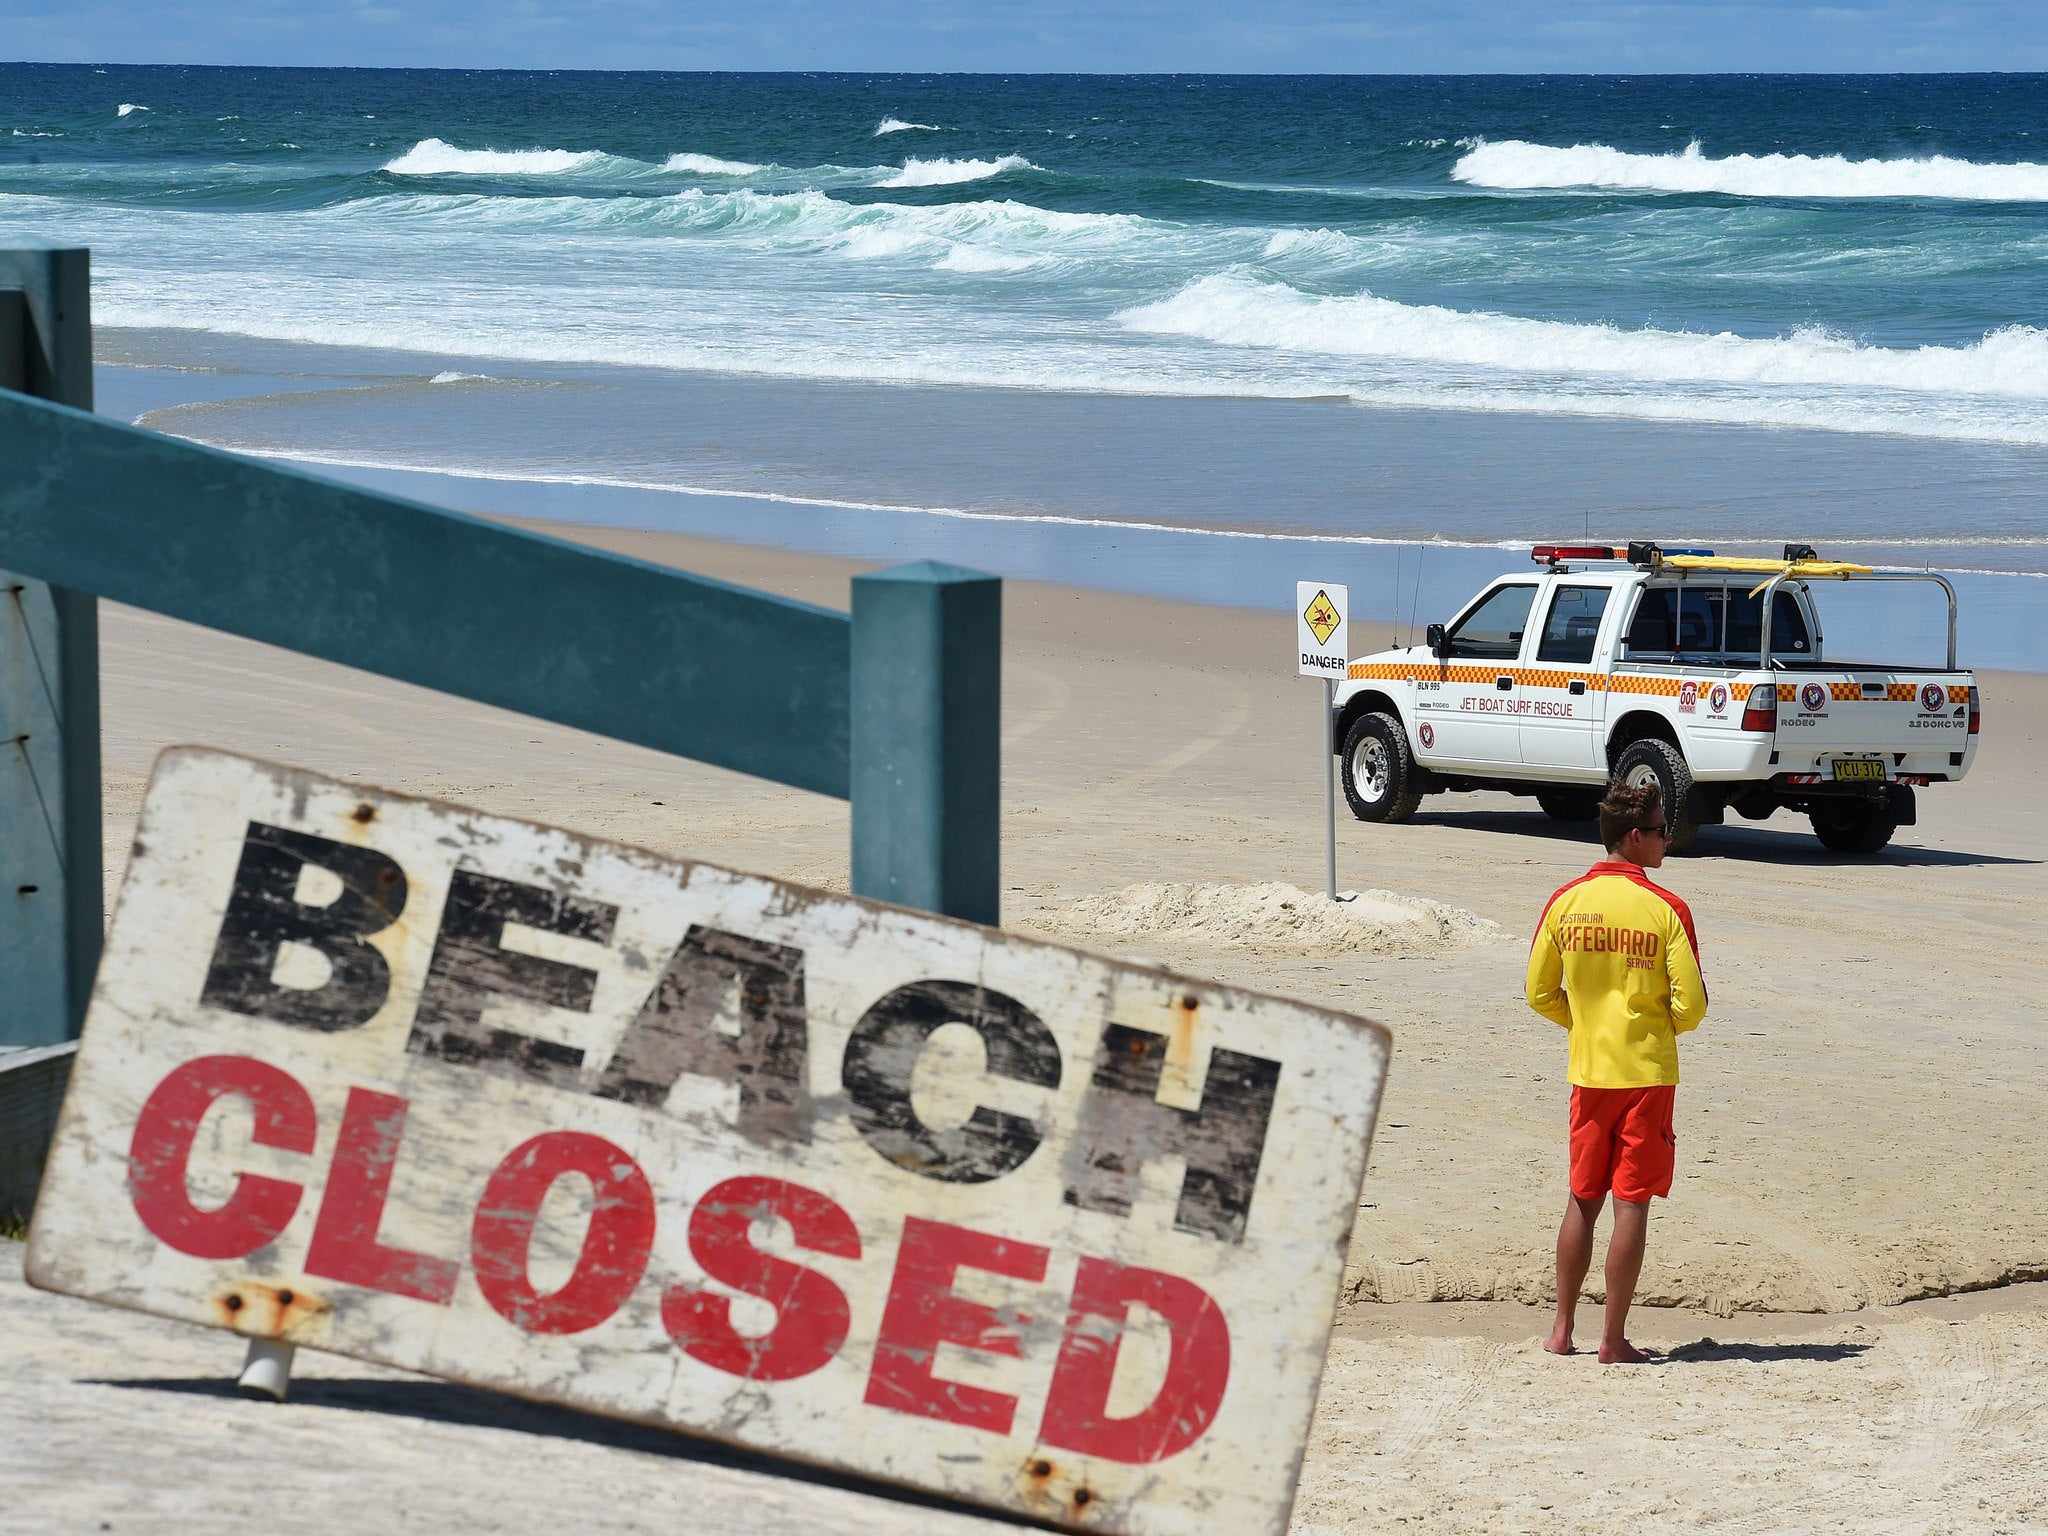 Shelly Beach has been closed following the attack 